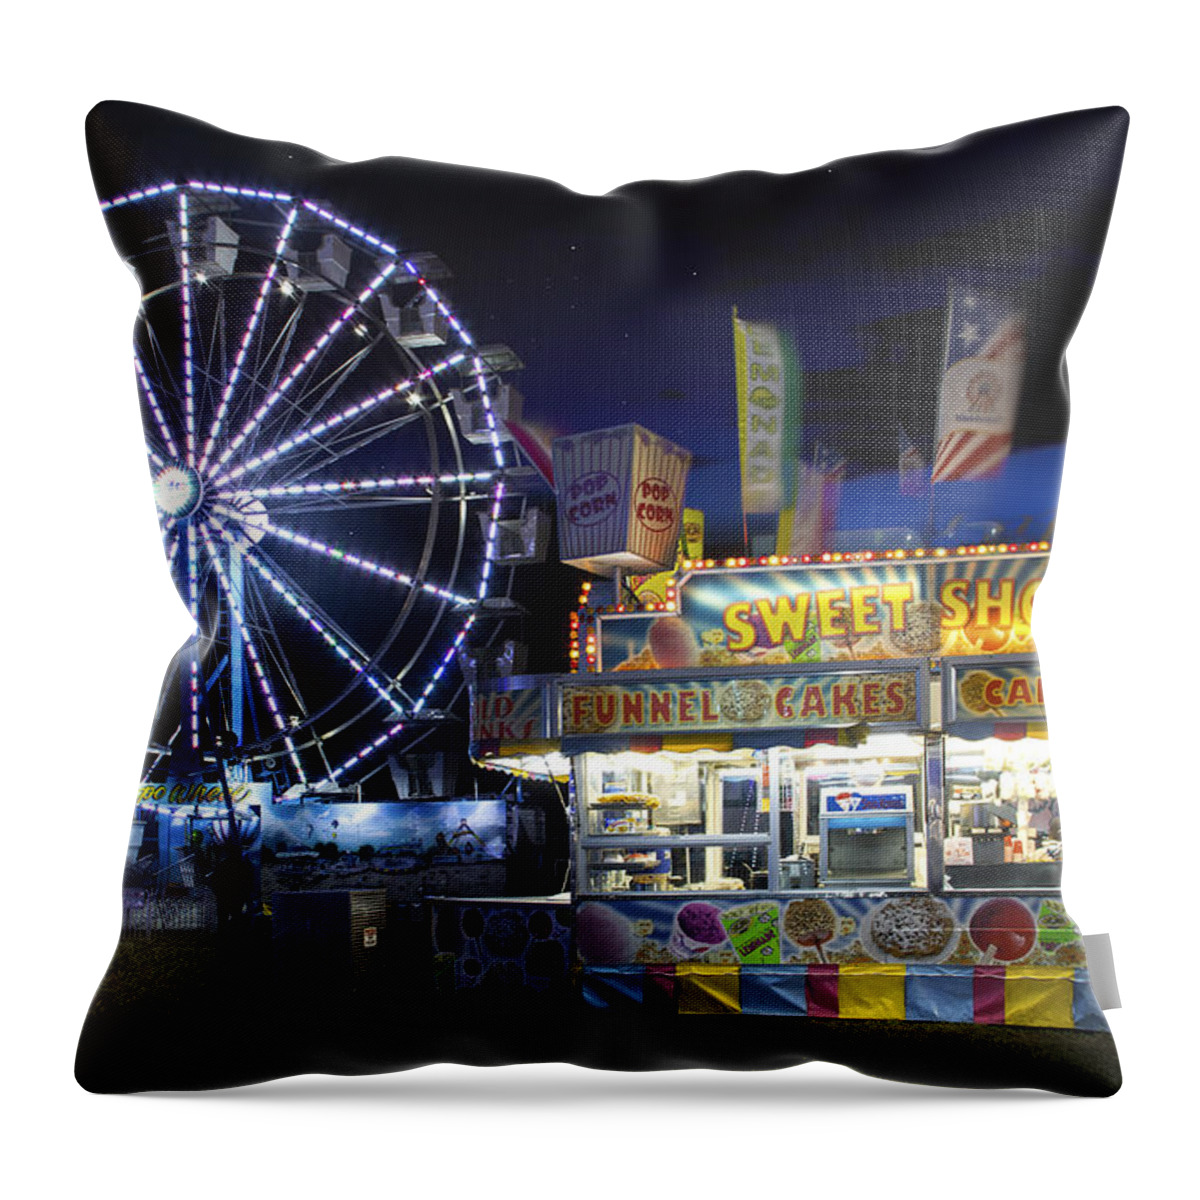 County Fair Throw Pillow featuring the photograph Midway Sweet Shoppe by Mark Andrew Thomas